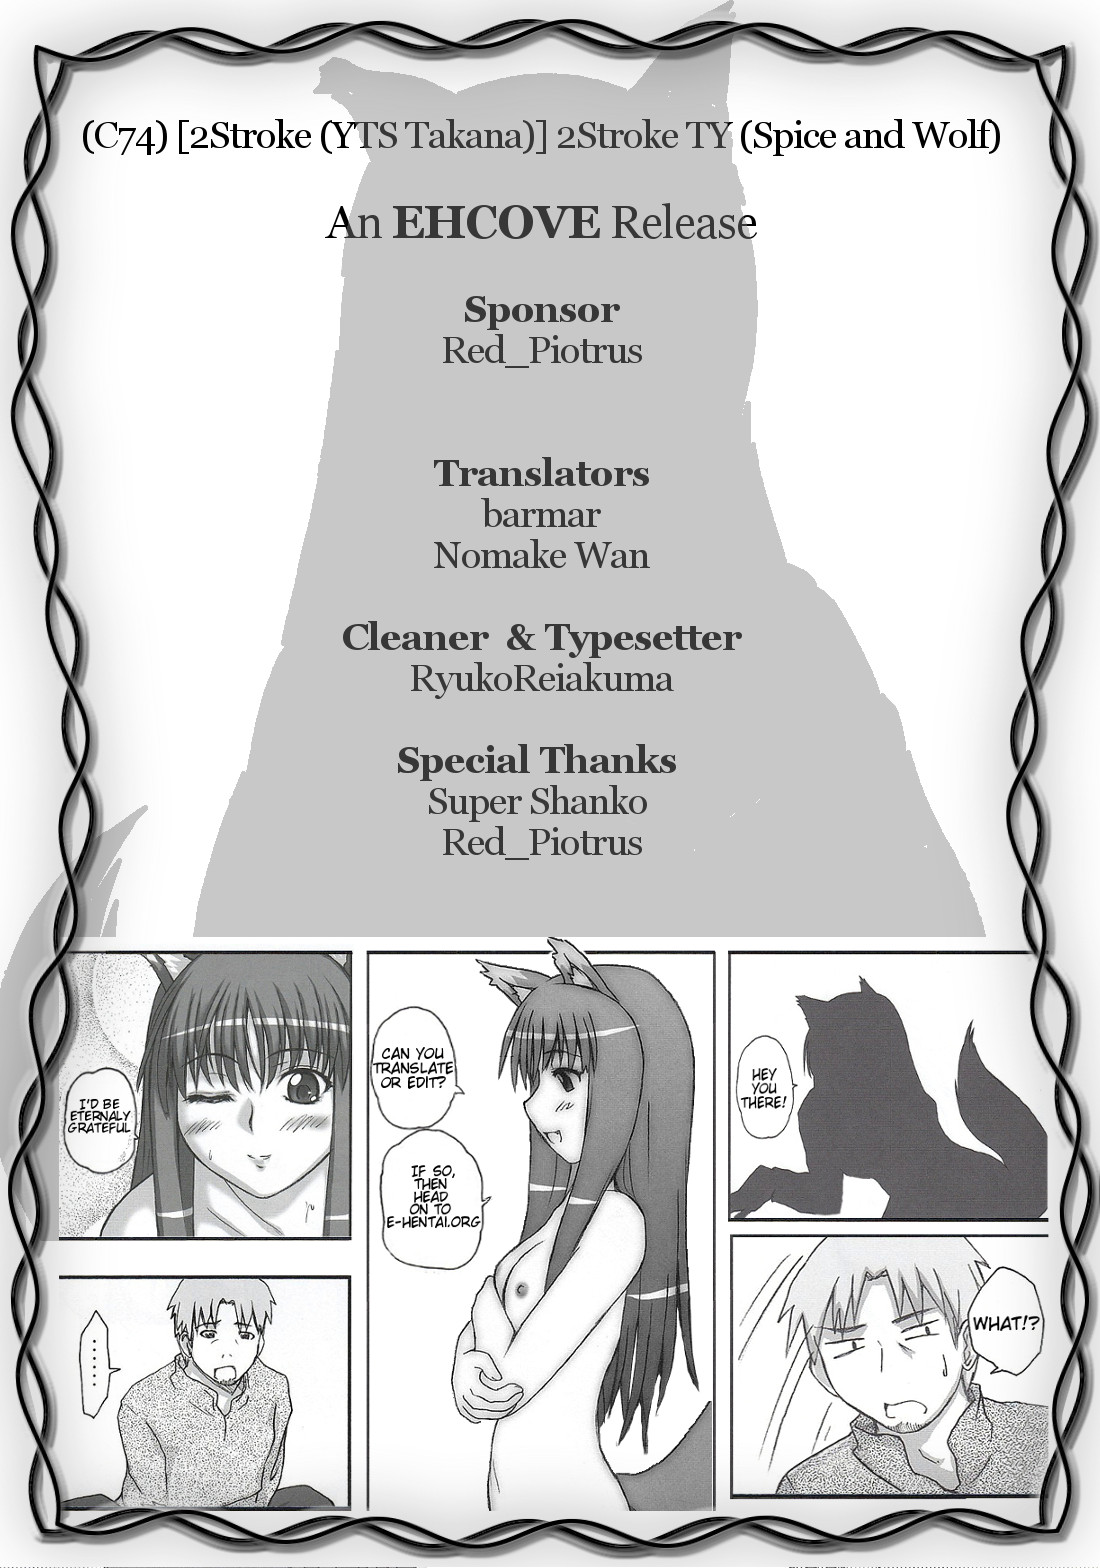 (C74) [2Stroke (YTS Takana)] 2Stroke TY (Spice and Wolf) [English] [EHCOVE] page 27 full